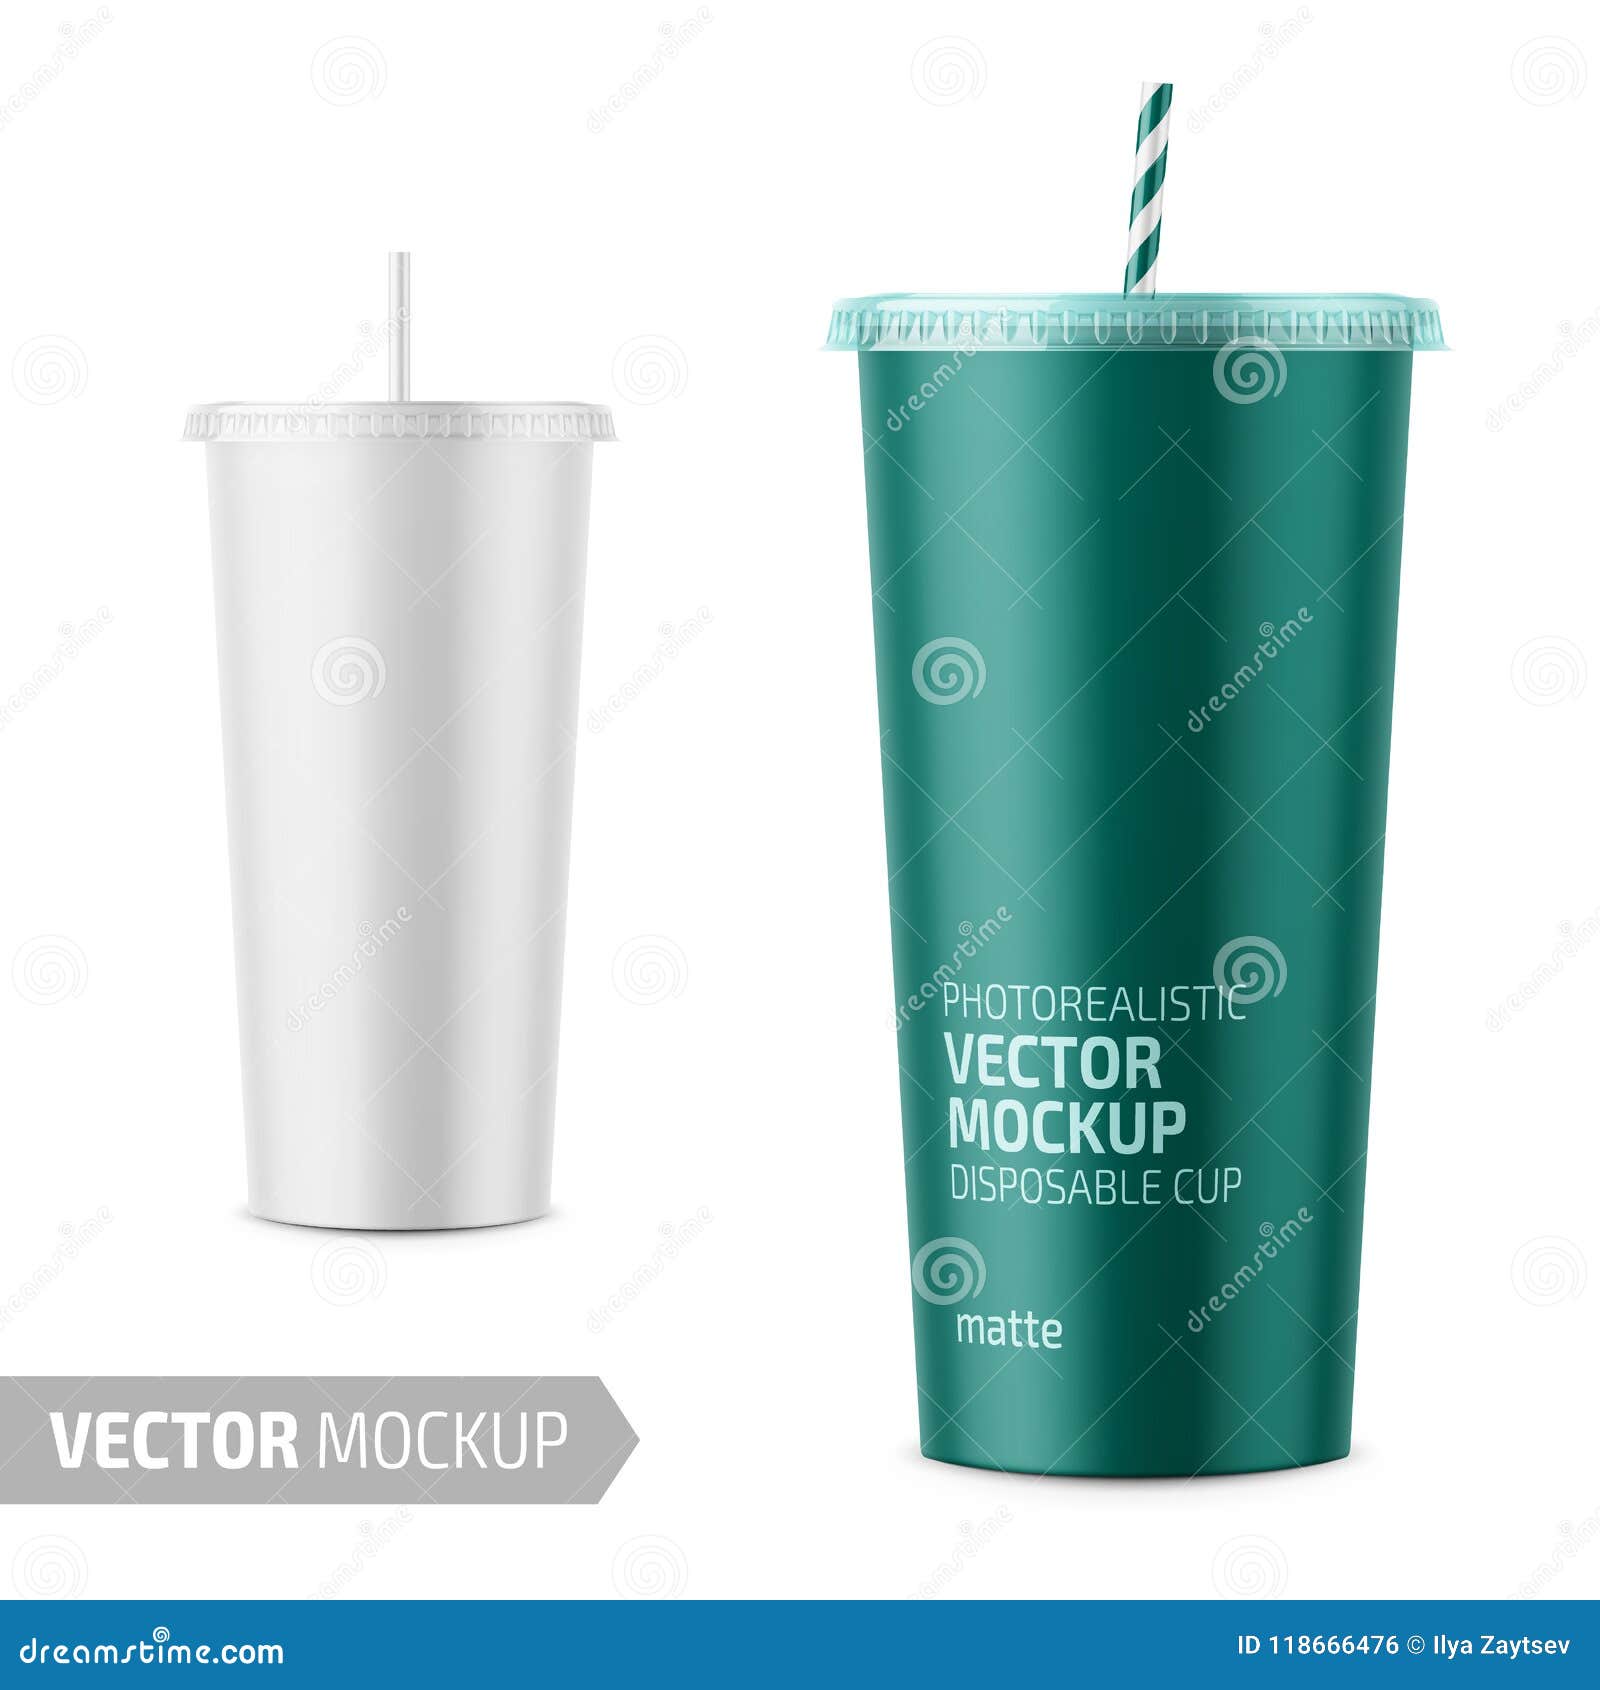 Clear Acrylic Insulated Tumbler 16 Oz Cup Mockup Stock Photography on White  Tabletop, Graphic Design Mock up Photo, JPG Digital Download 